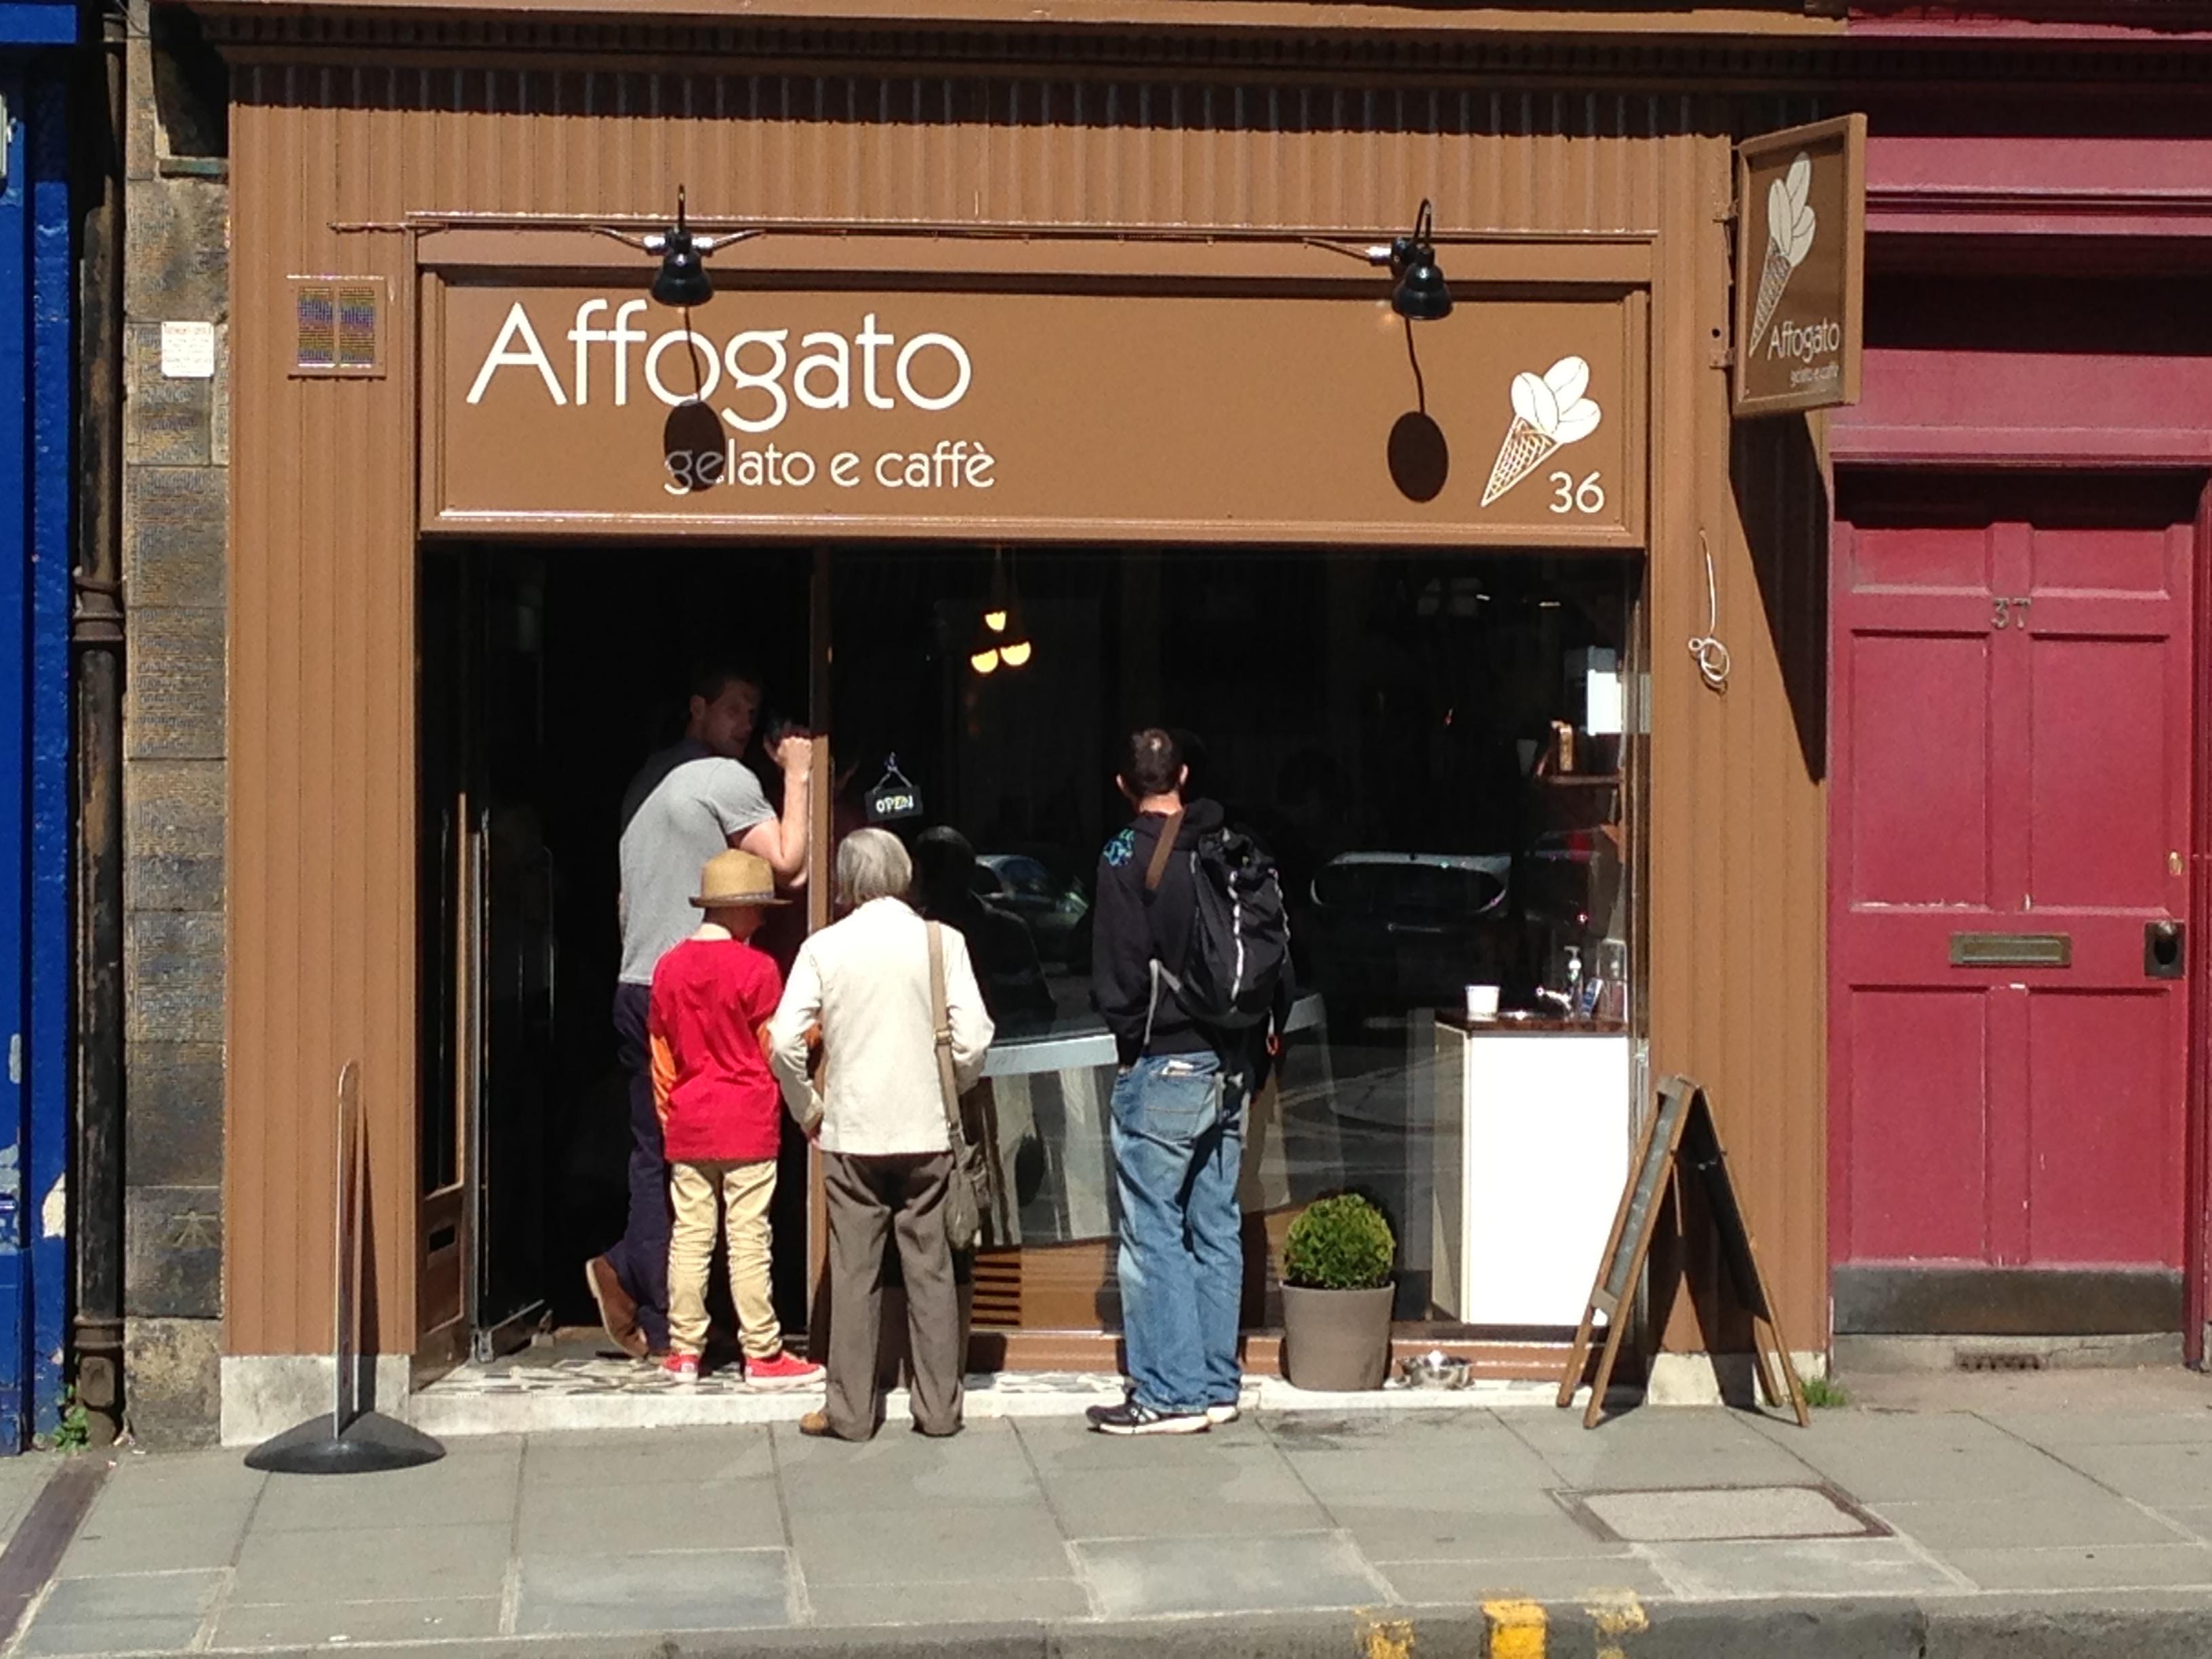 Cover image of this place Affogato